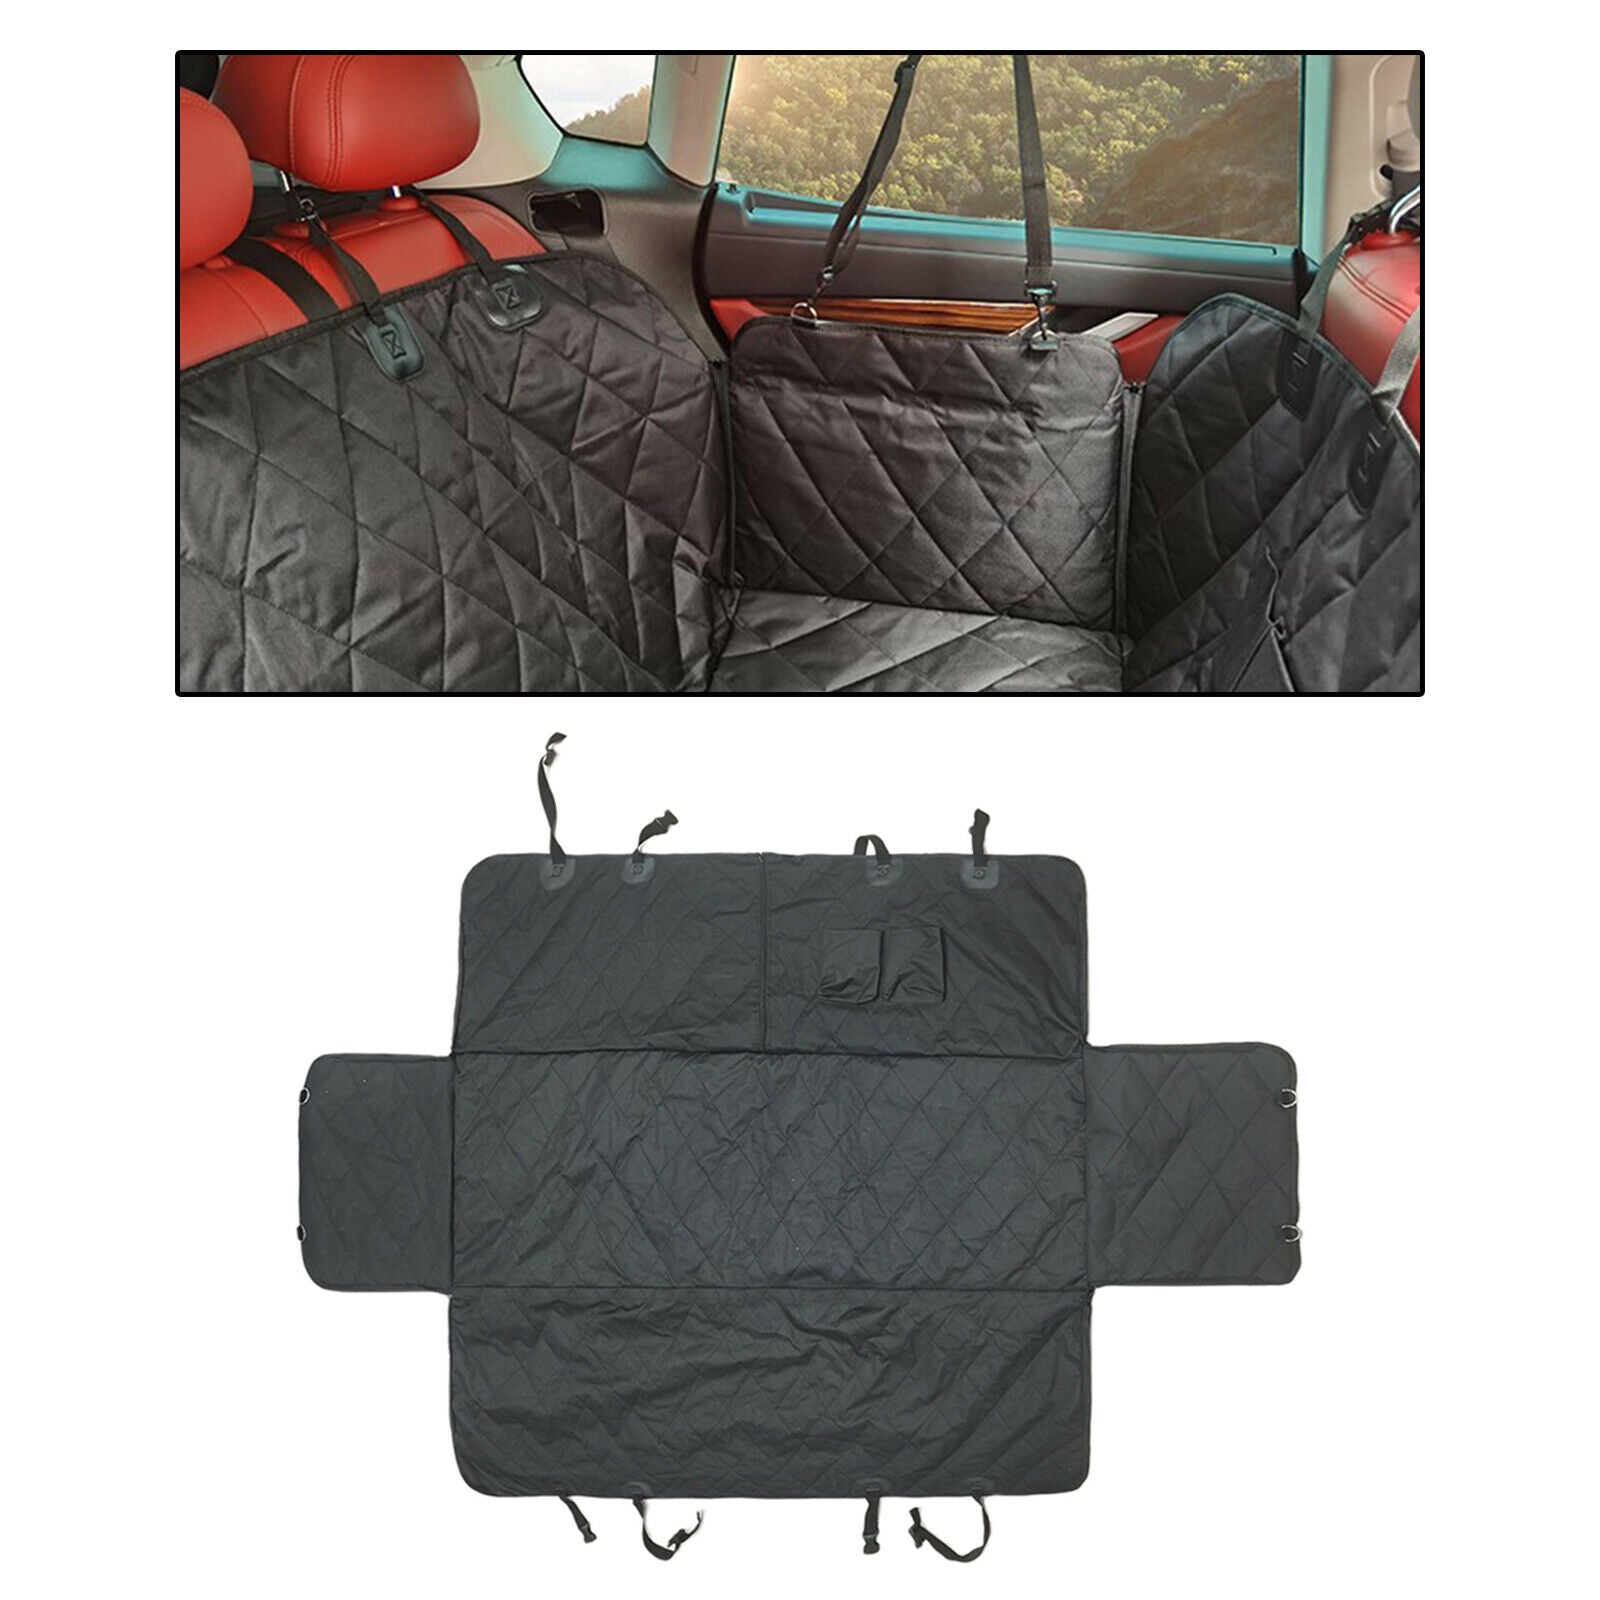 Dog Car Back Seat Cover with Side Flaps Hammock Travel Truck Mat Nonslip